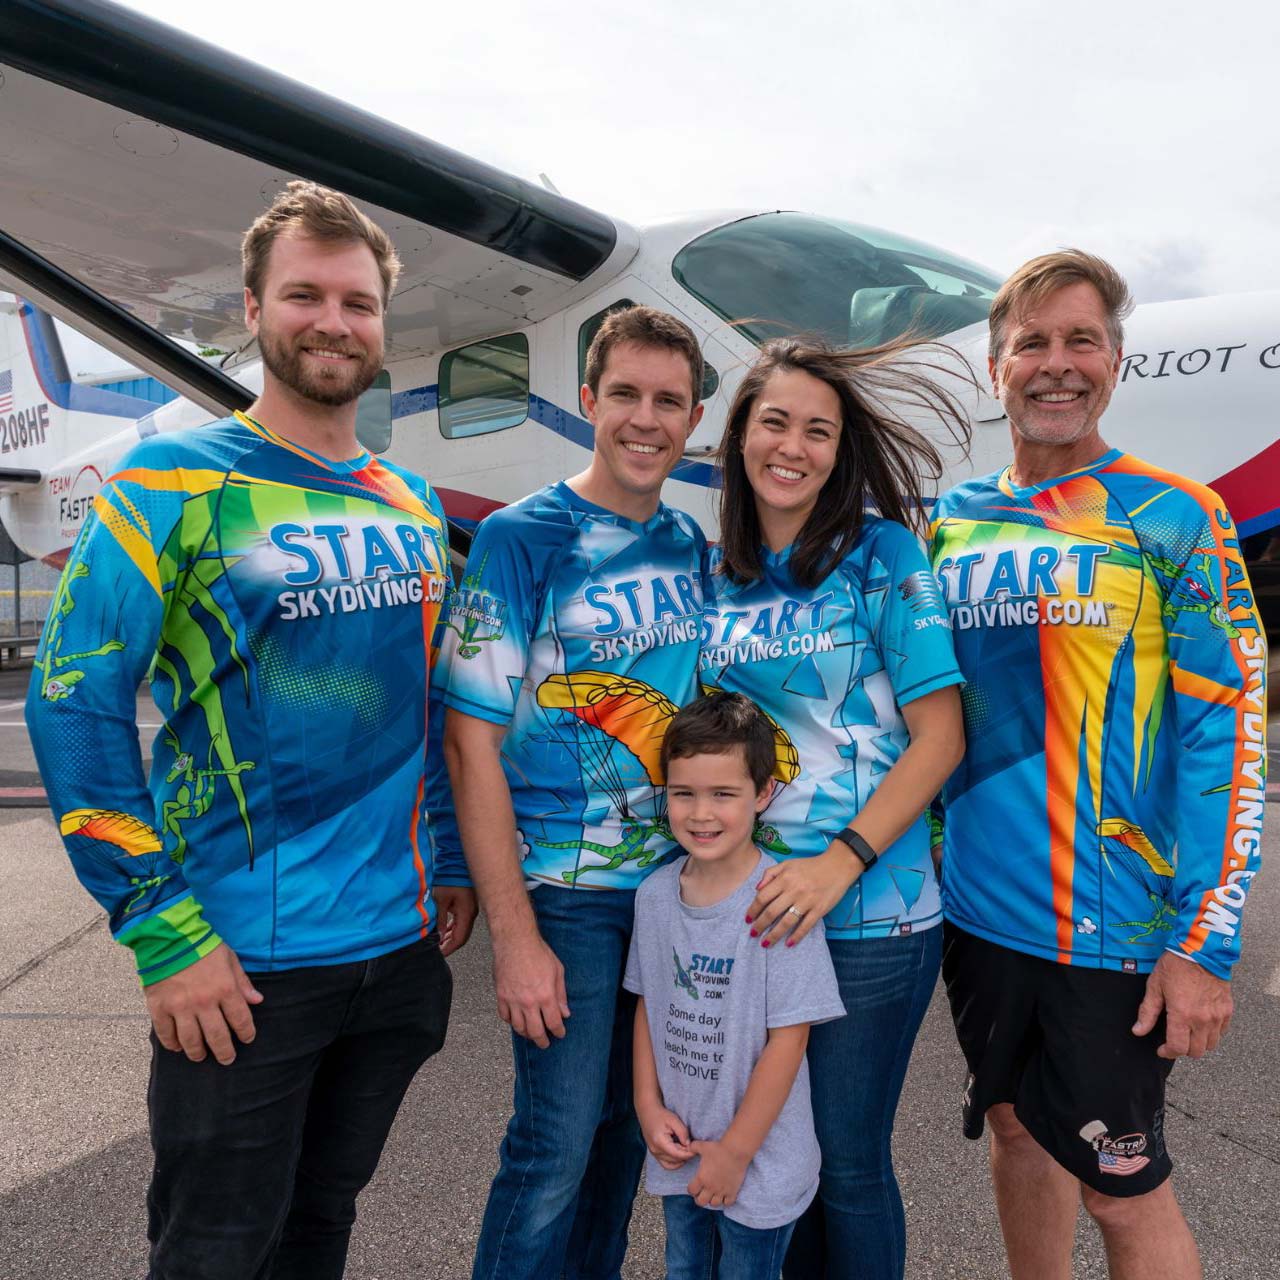 Alex Hart, John Hart II, married couple John Hart III and Lisa Hart, and their young son smile wearing Start Skydiving team jerseys in front of the Patriot One Aircraft.